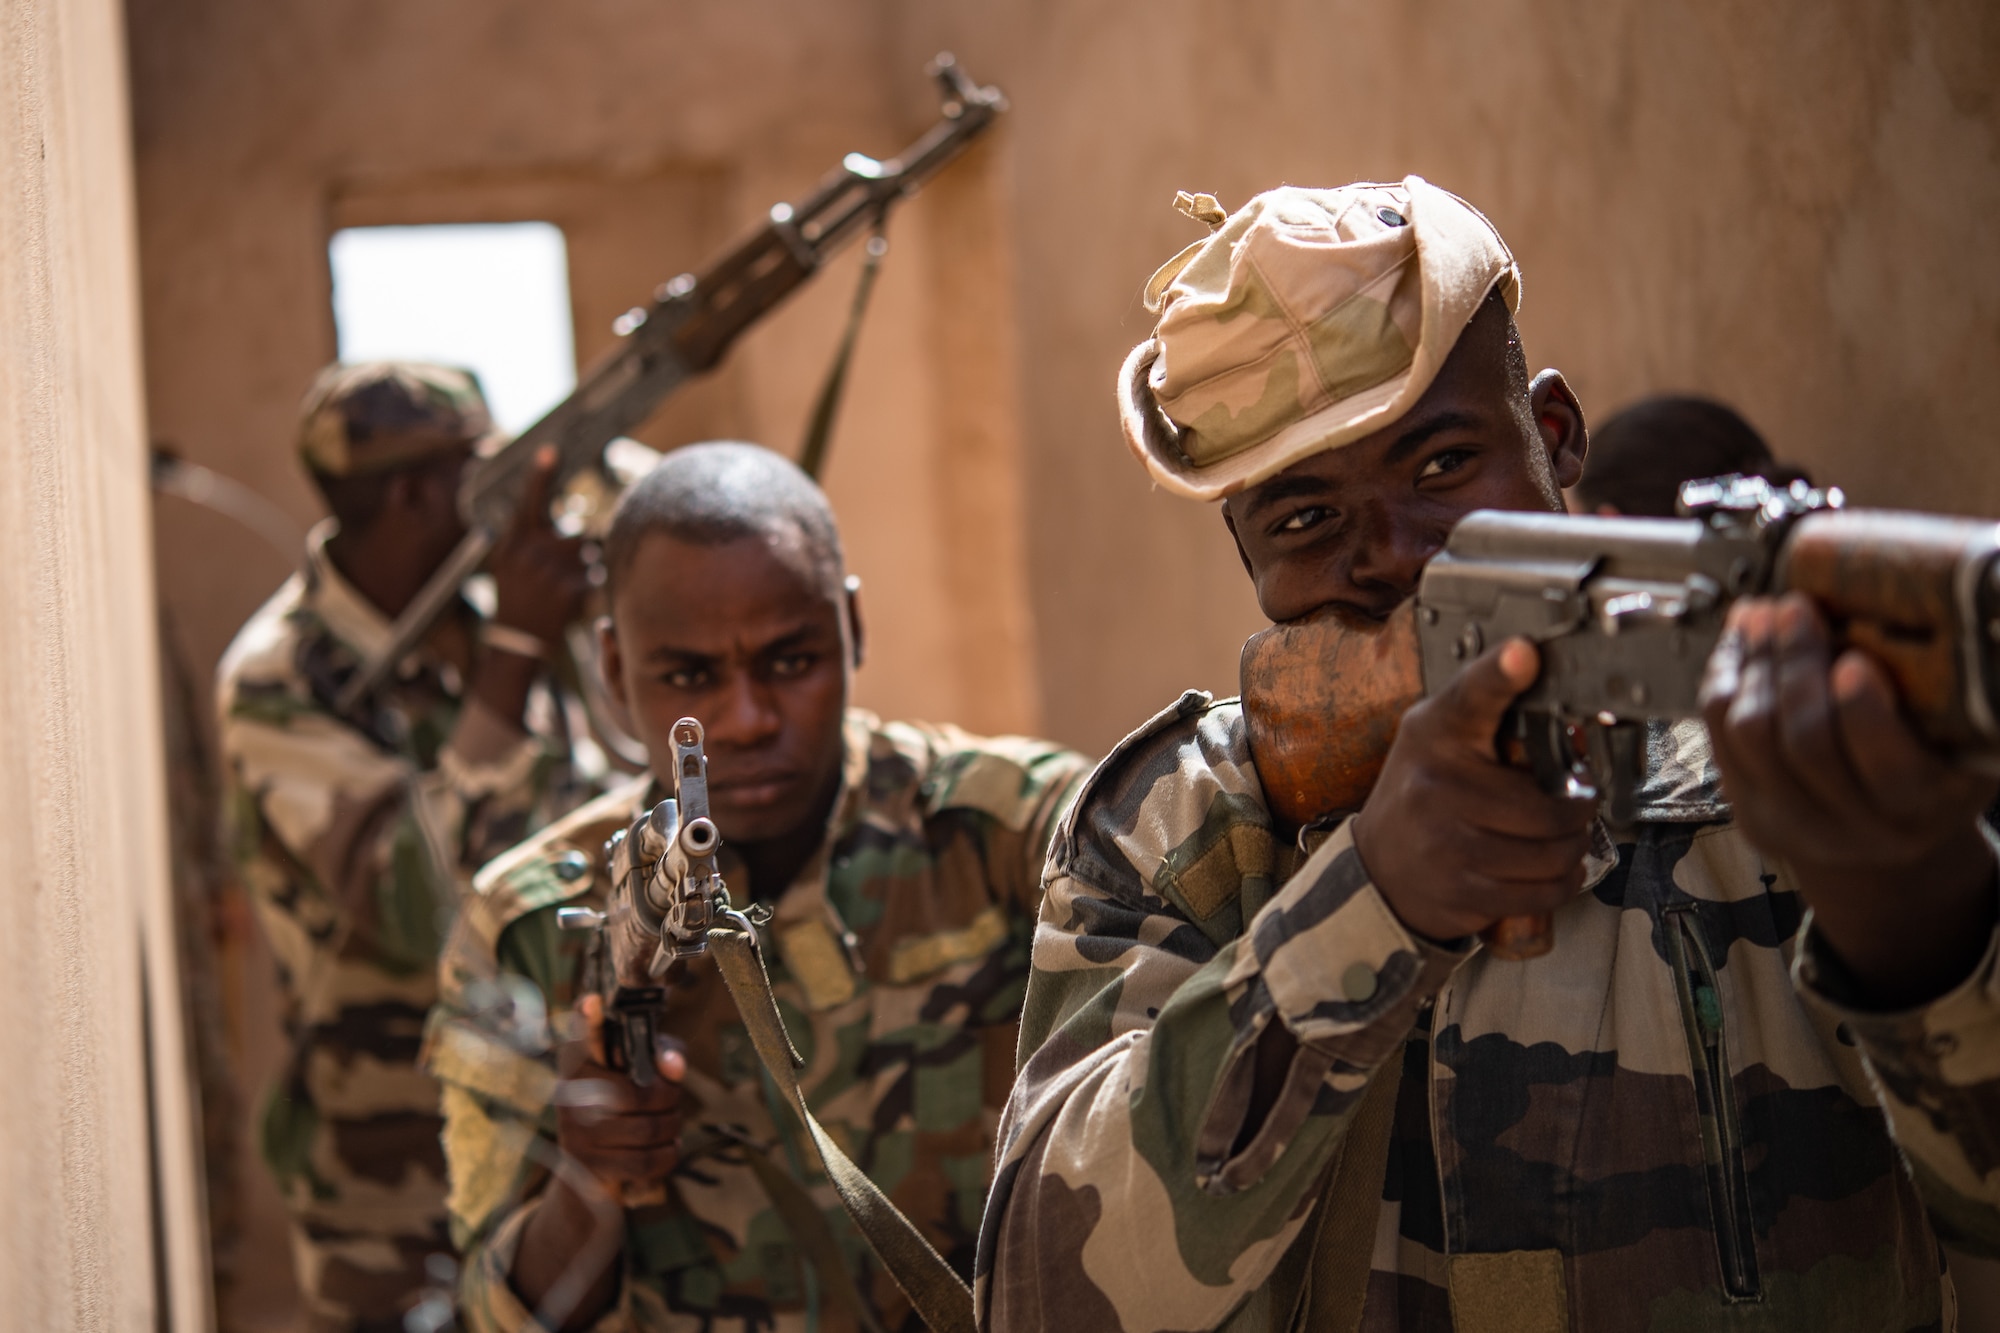 Niger Armed Forces (French language: Forces Armées Nigeriennes) members clear a corridor during a training exercise with the 409th Expeditionary Security Forces Squadron air advisors at the FAN compound on Nigerien Air Base 201 in Agadez, Niger, July 10, 2019. The training improves interoperability, and enables the Nigeriens to protect themselves during deployments. (U.S. Air Force photo by Staff Sgt. Devin Boyer)